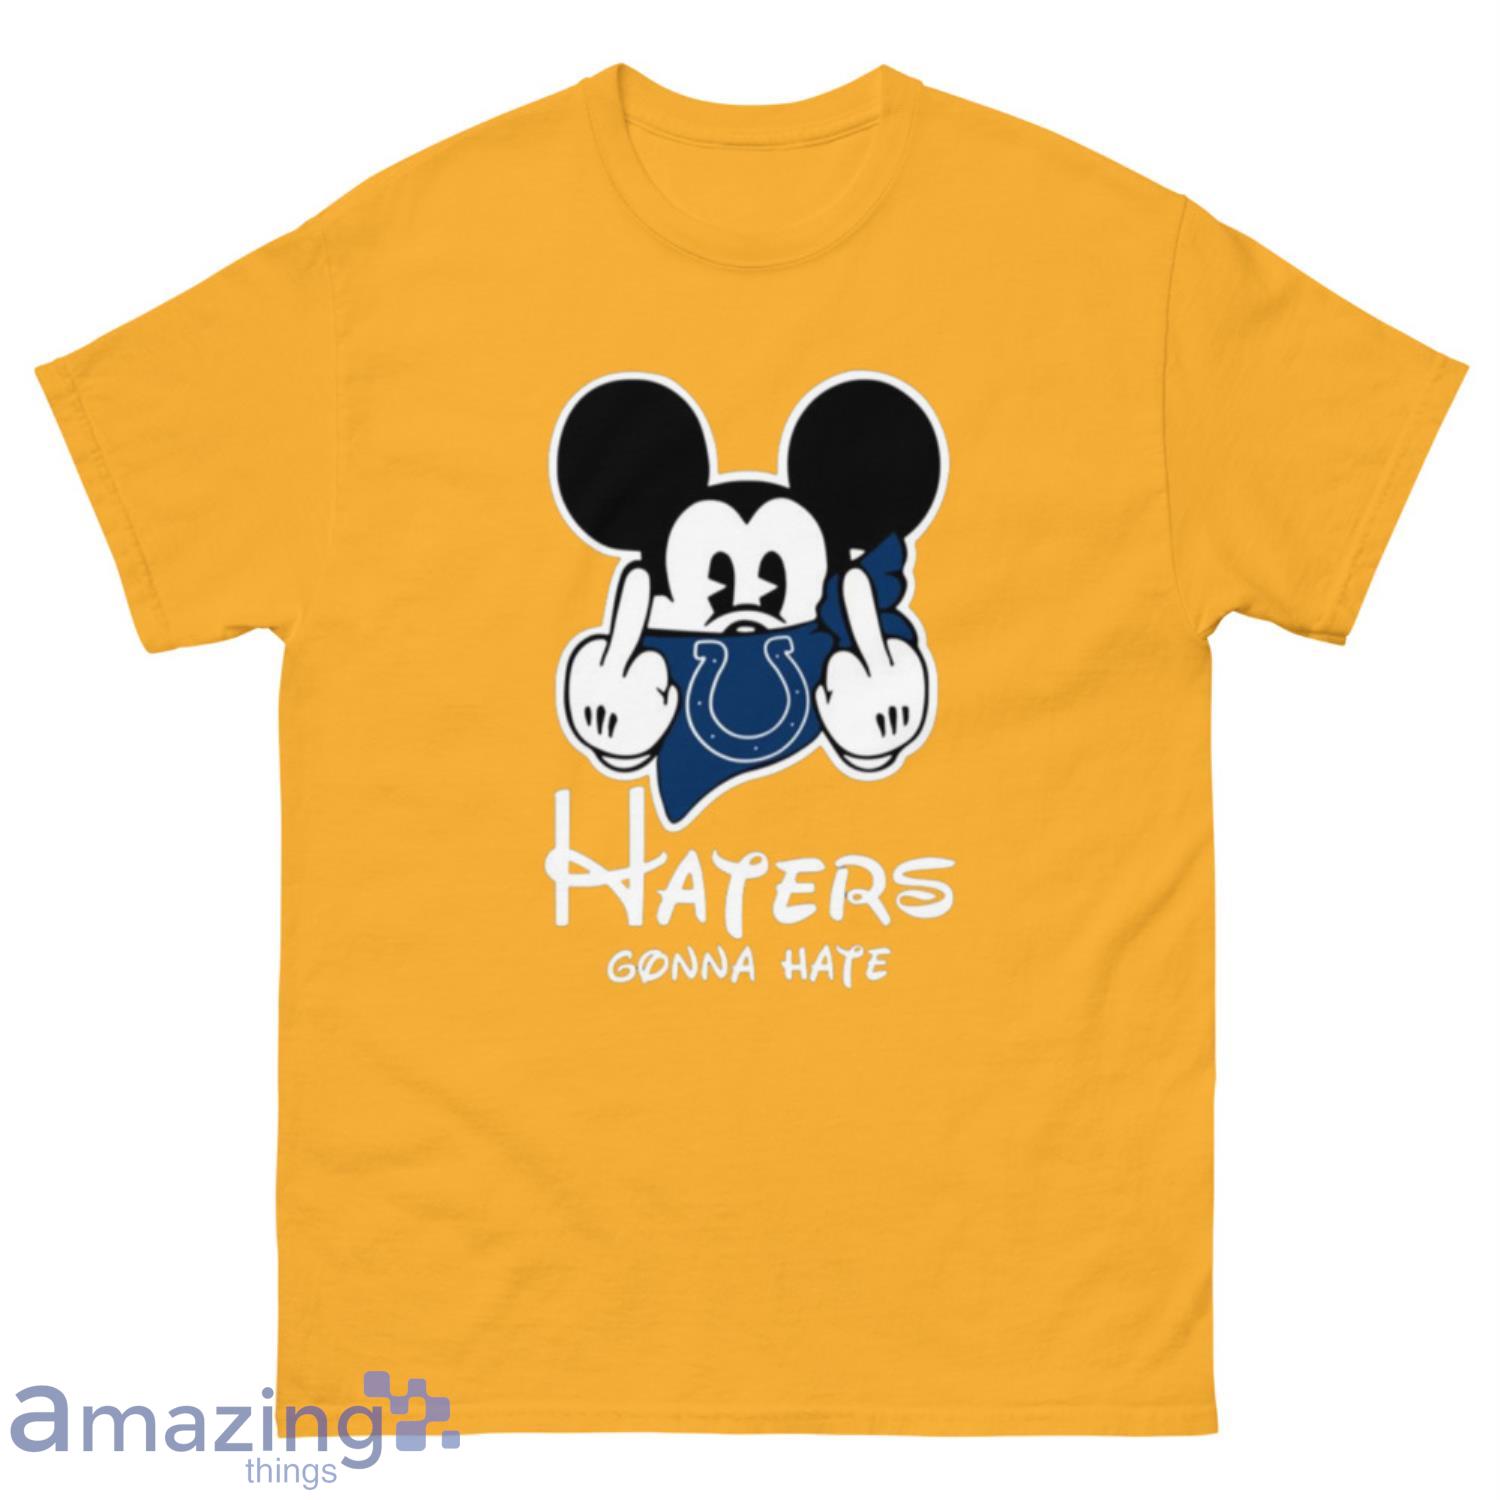 NFL Indianapolis Colts Haters Gonna Hate Mickey Mouse Disney Football T-Shirt Sweatshirt Hoodie - 500 Men’s Classic Tee Gildan-1